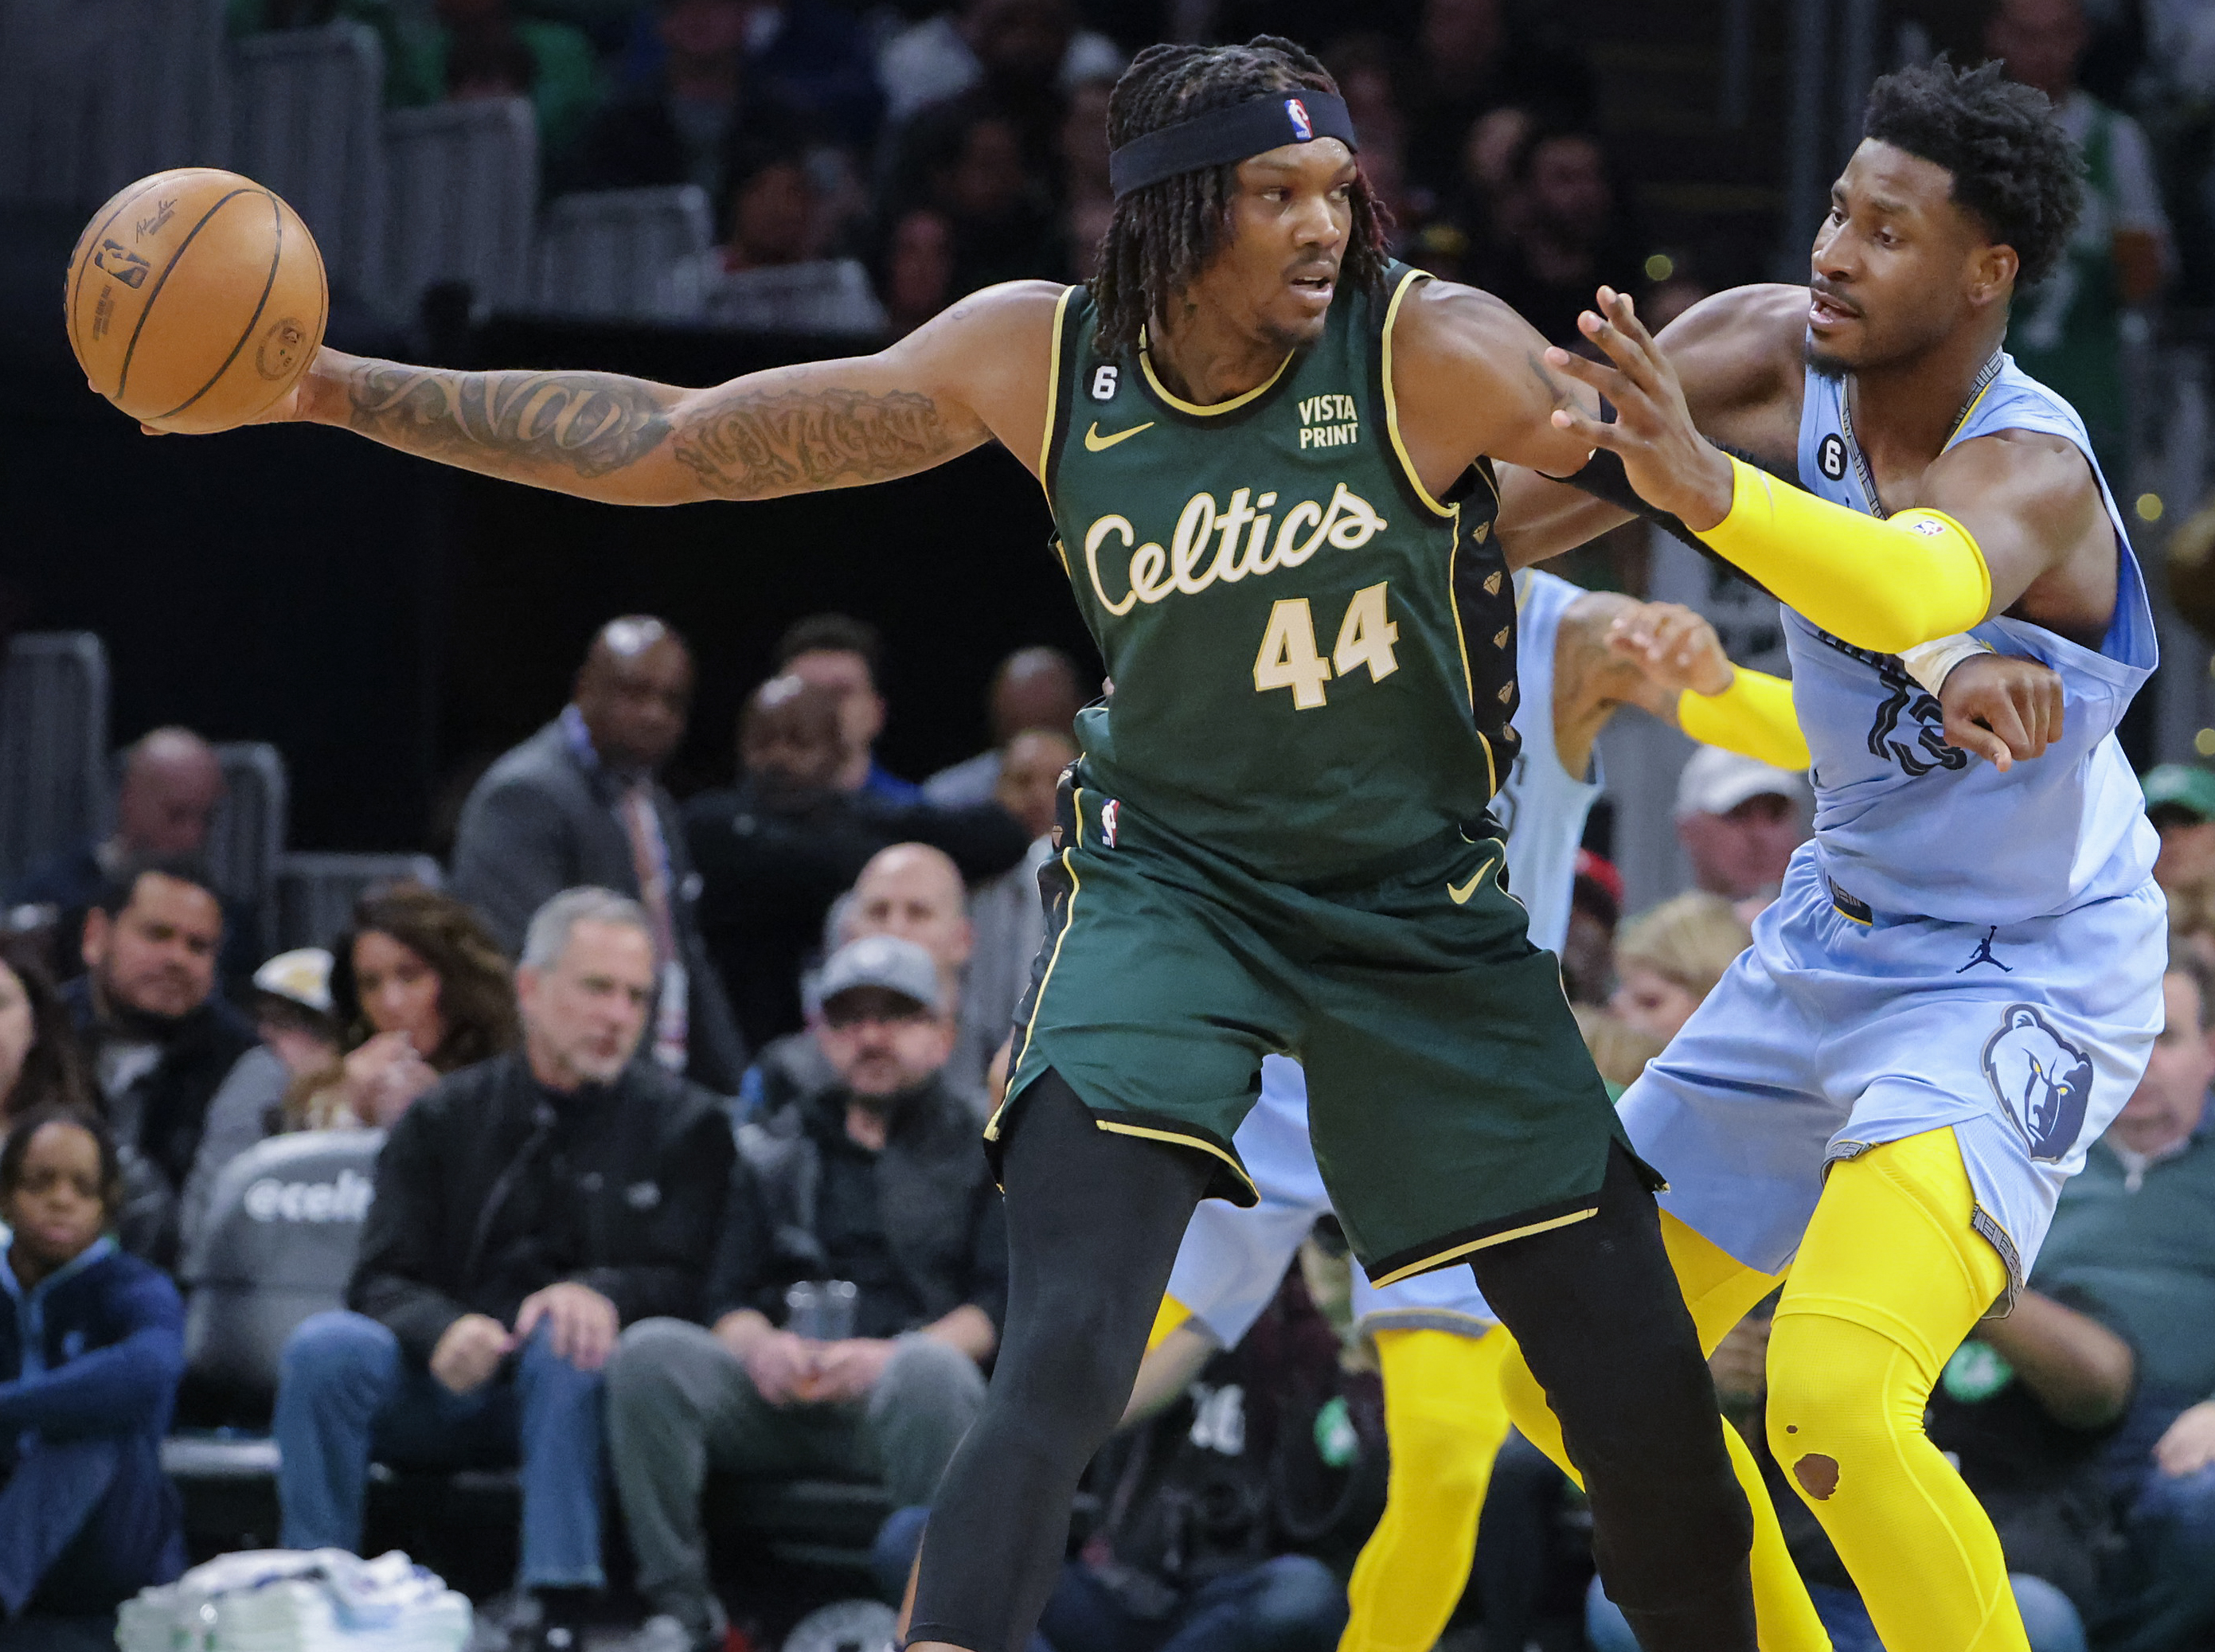 3 players who have uncertain futures with the Boston Celtics